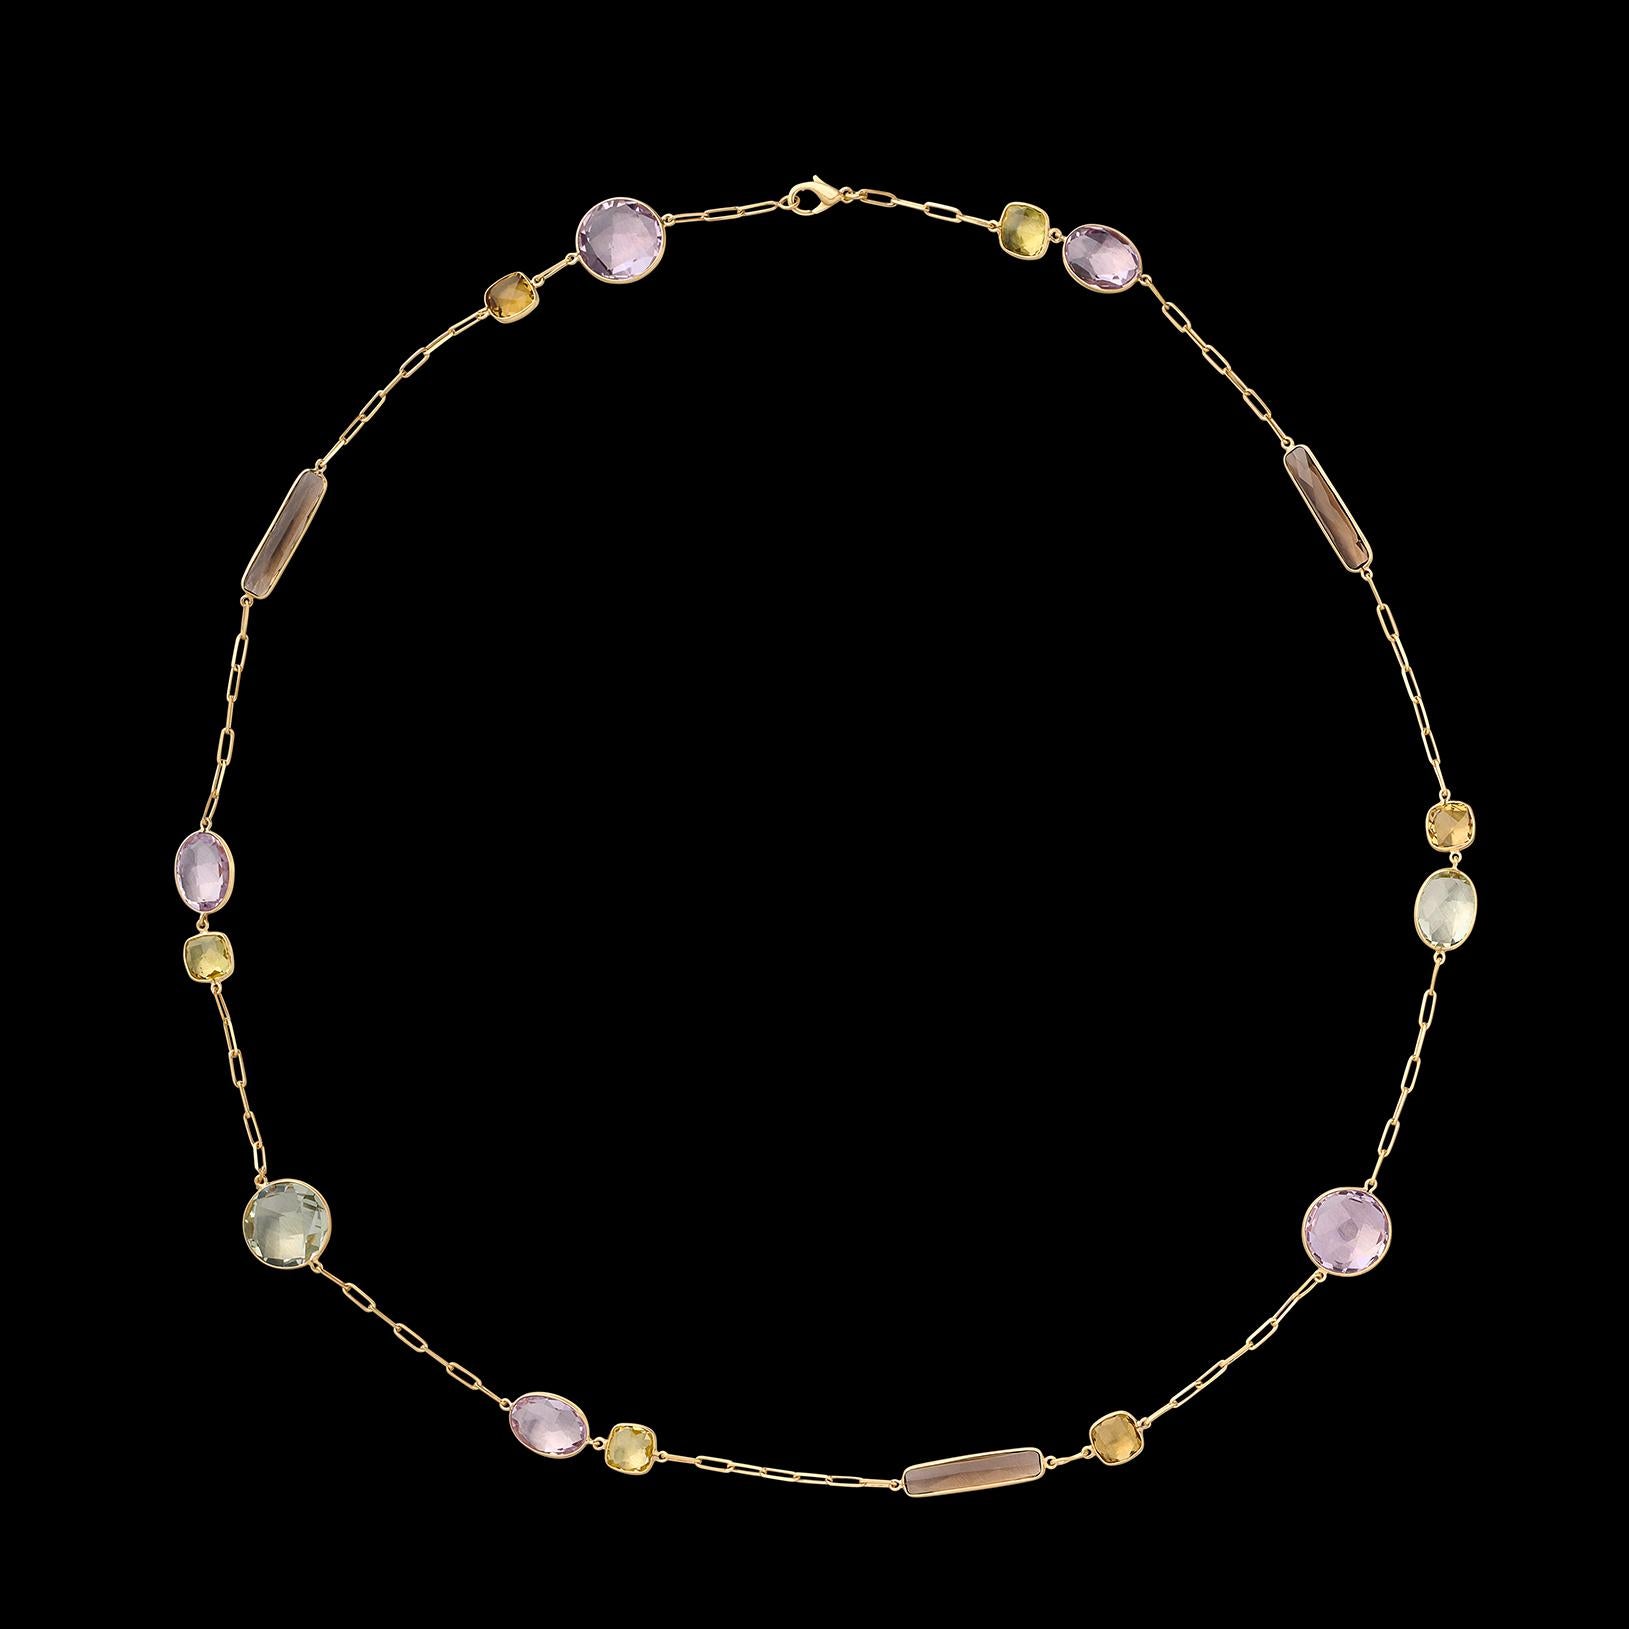 As pretty a piece of fashion jewelry as you're likely to find. This 18 karat yellow gold necklace features 16 eye-catching semi-precious stones bezel set around this link chain. The assortment of stones are vibrant purples, greens, and blues spaced